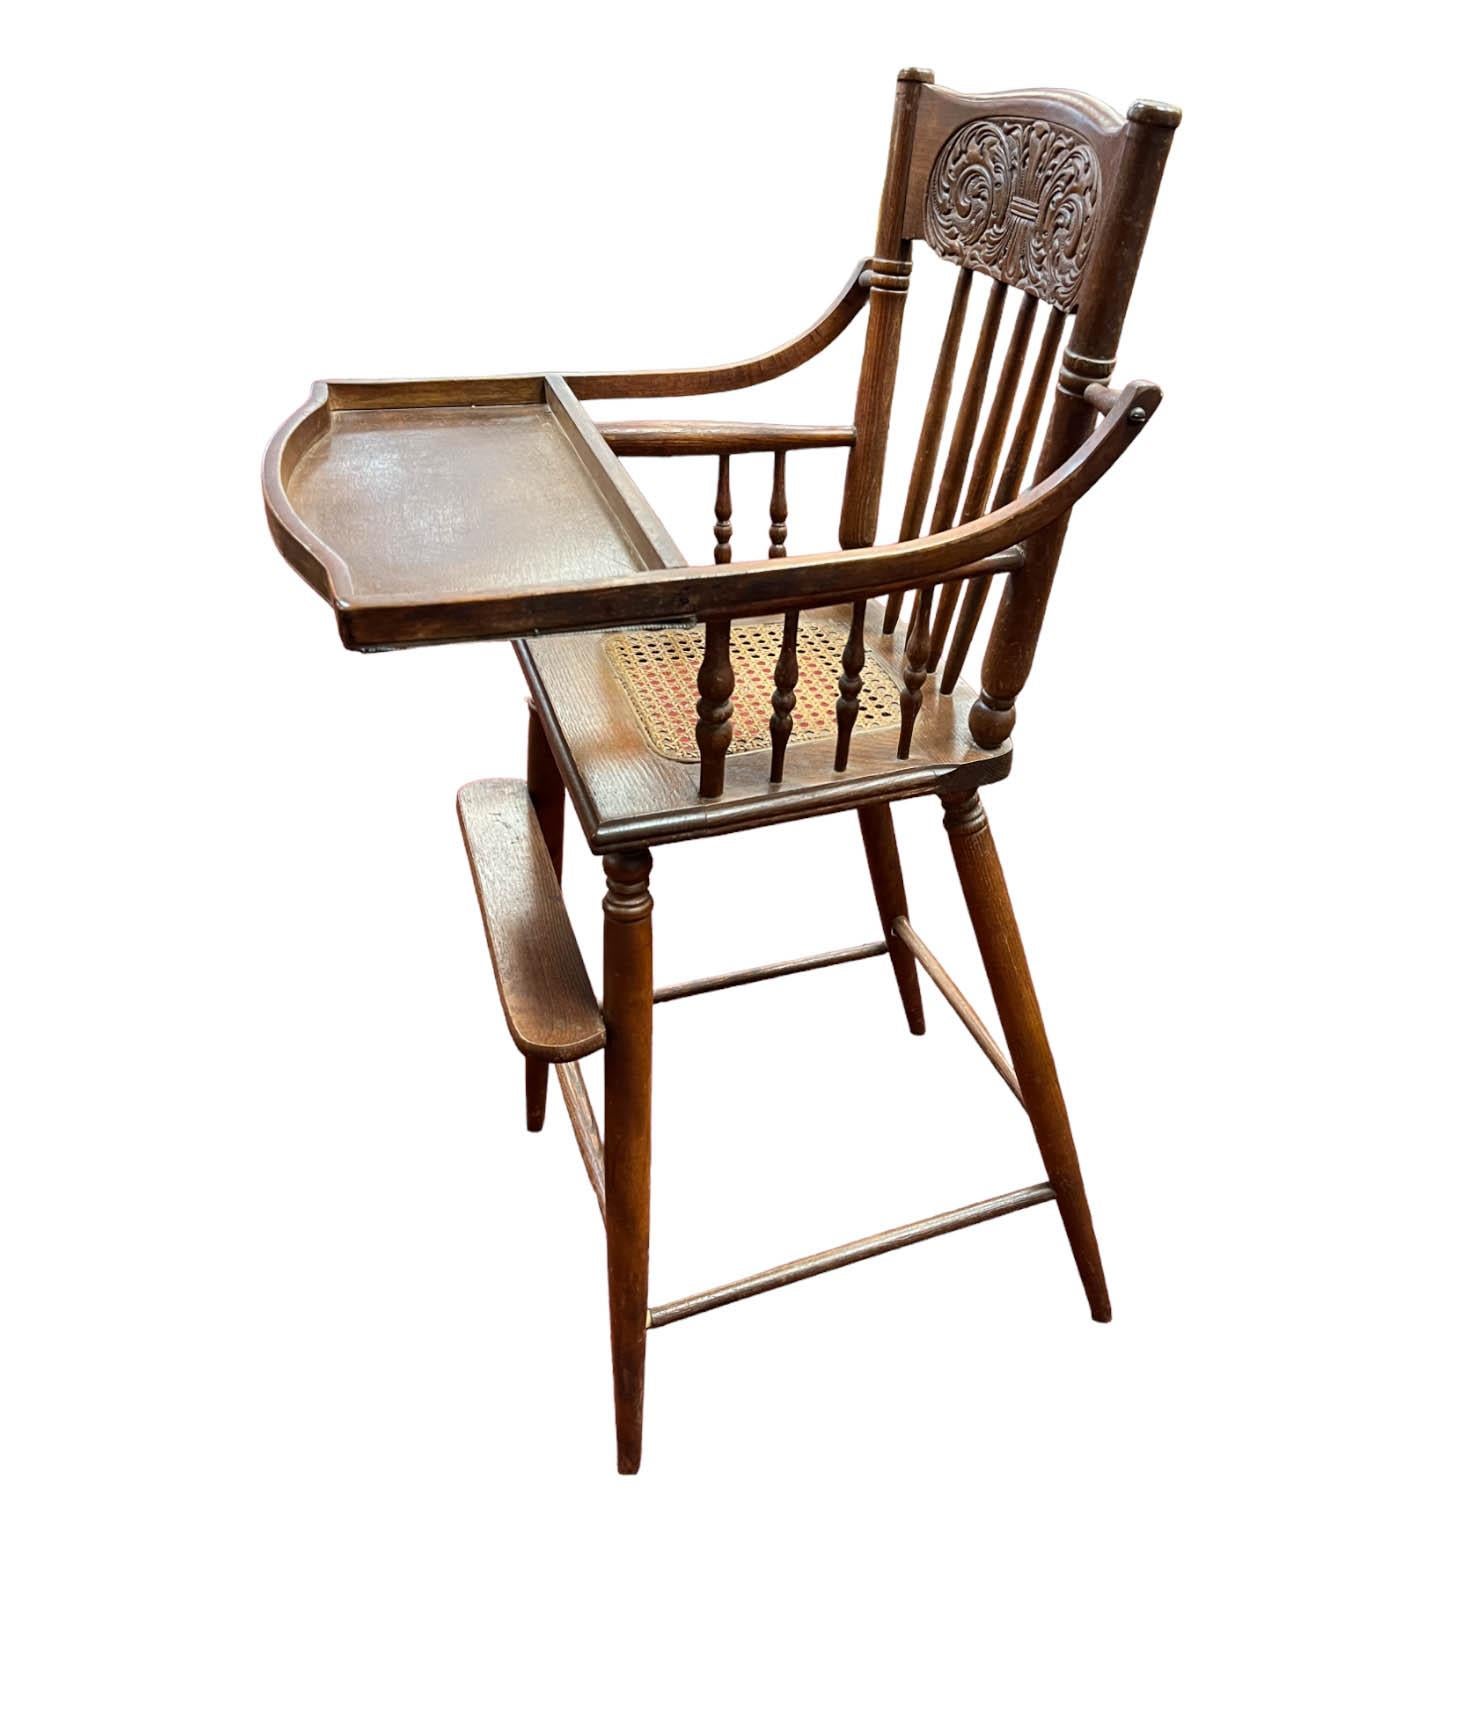 An Antique Victorian Era Baby High Chair, a charming and authentic piece that harks back to a bygone era. This high chair carries numerous exquisite details, such as the cane seat, intricately carved backrest, and classic spindles, which showcase